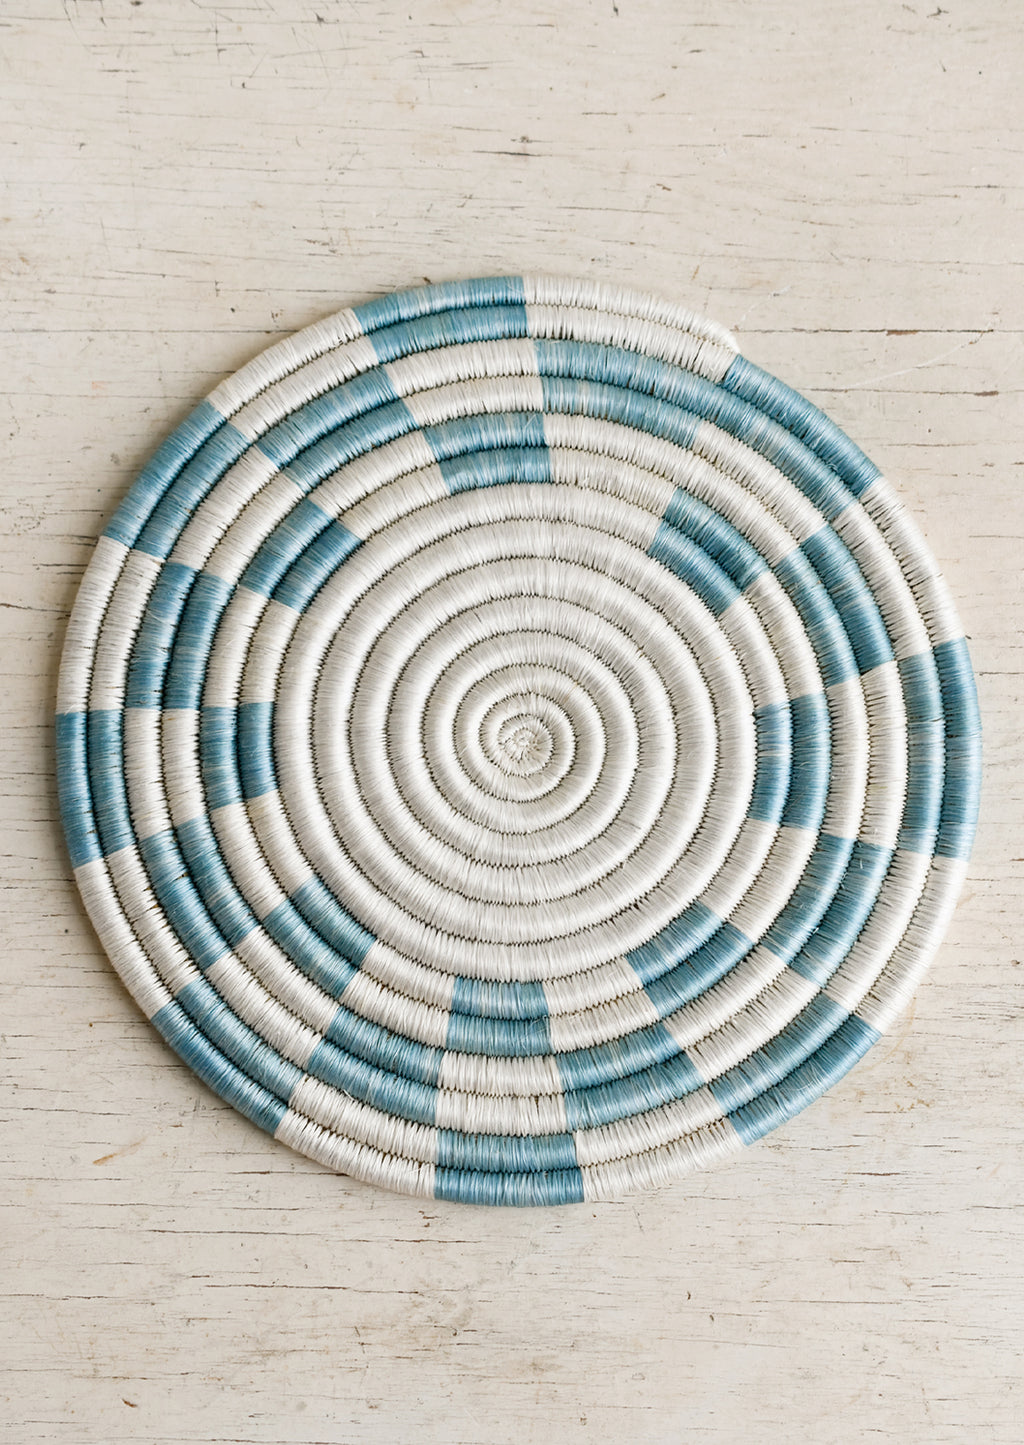 Sky Blue / White: A woven sweetgrass trivet with geometric pattern in white and sky blue.